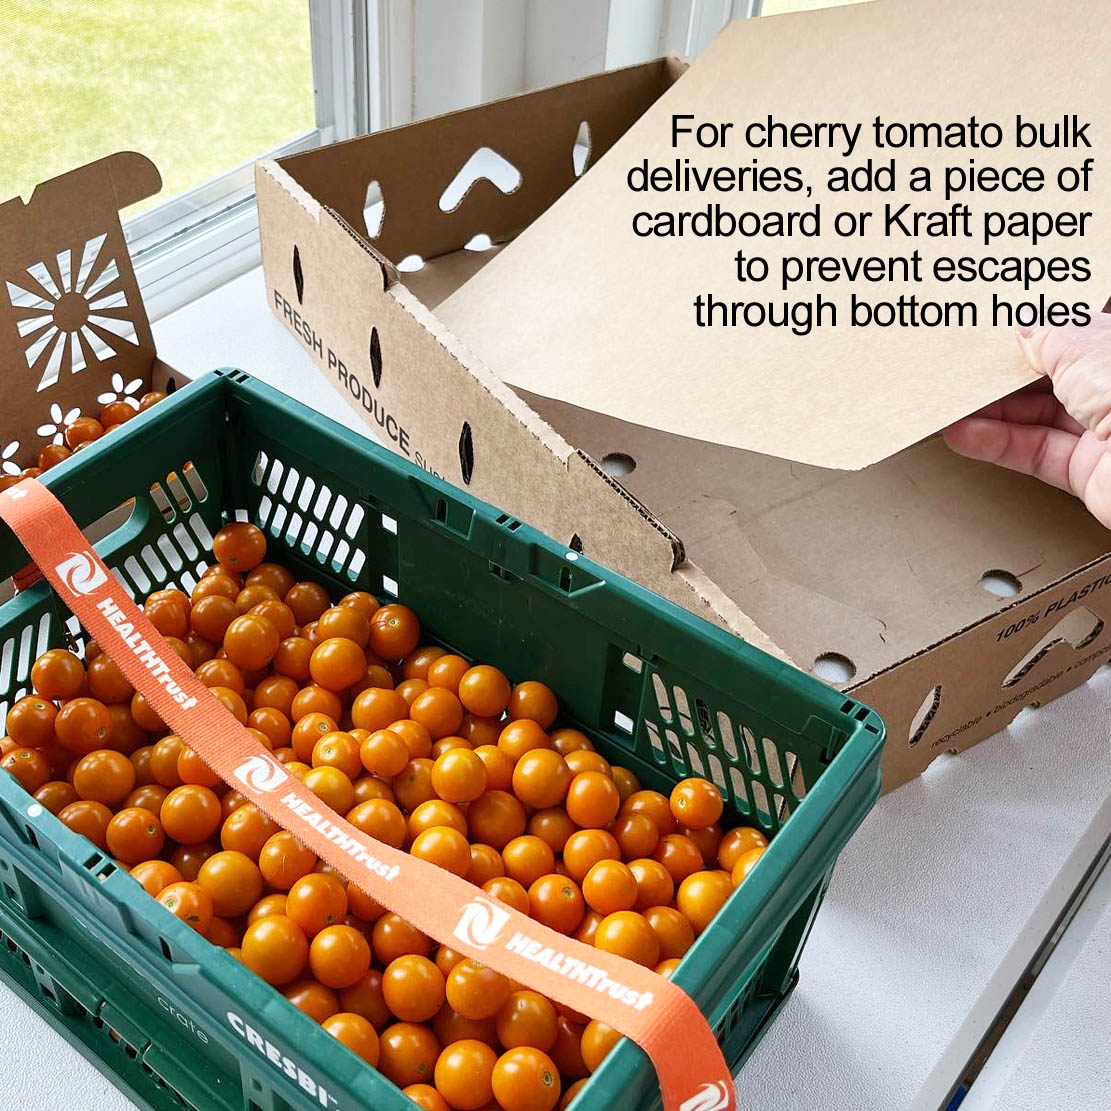 1 Quart Kraft Paper Sustainable Produce Containers